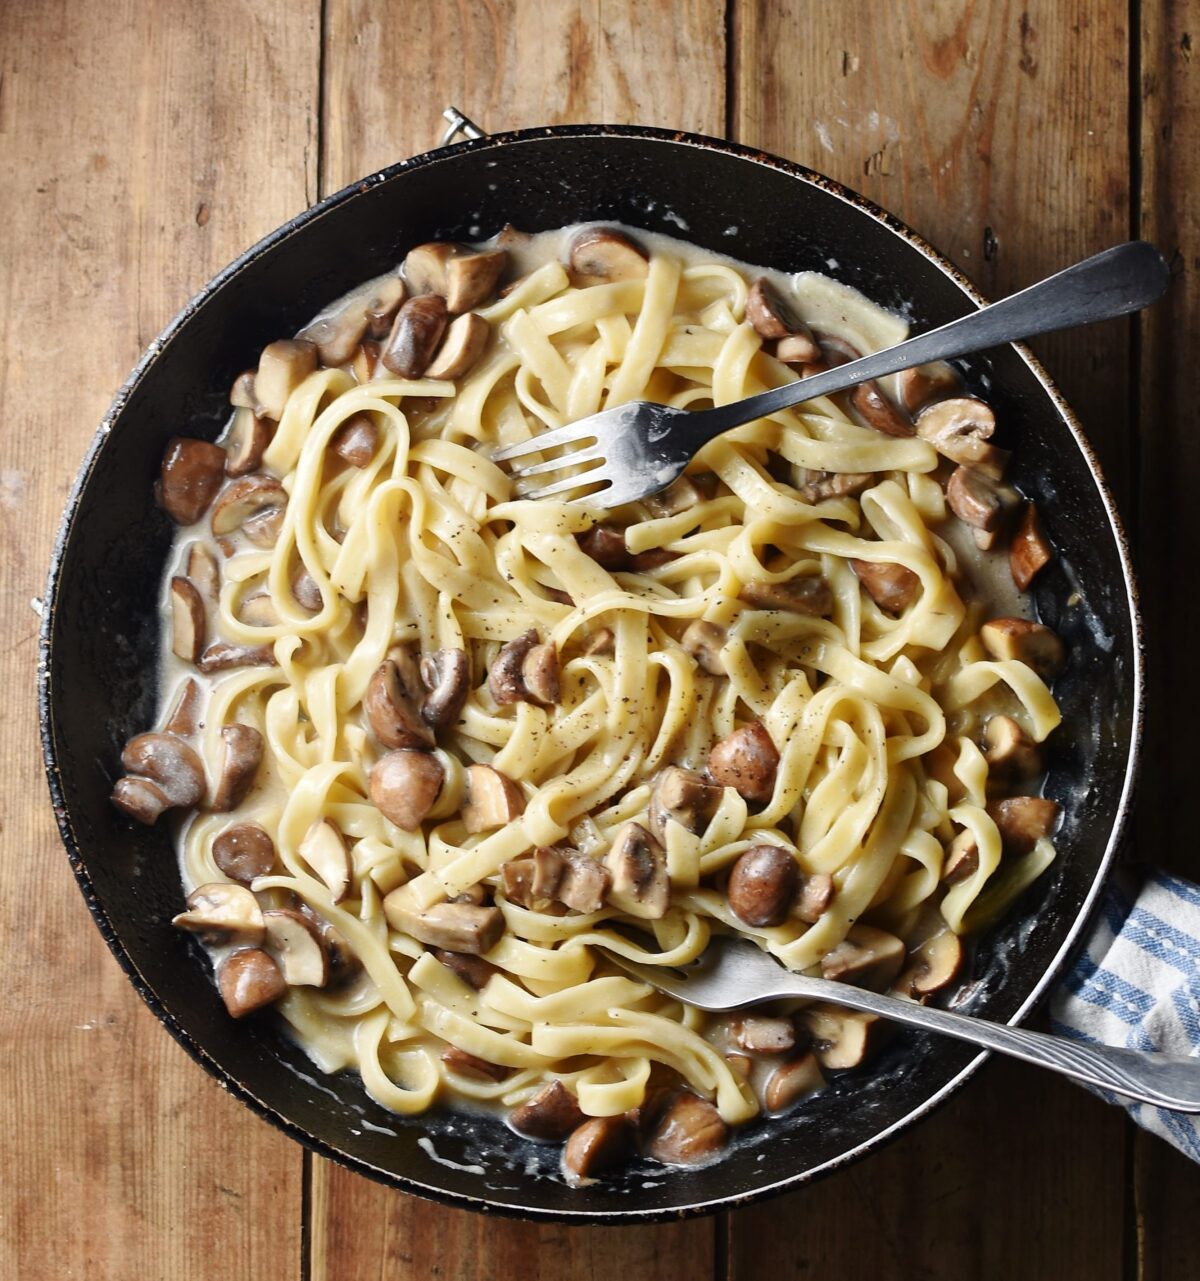 Tagliatelle pasta with mushroom sauce and 2 forks in large skillet.